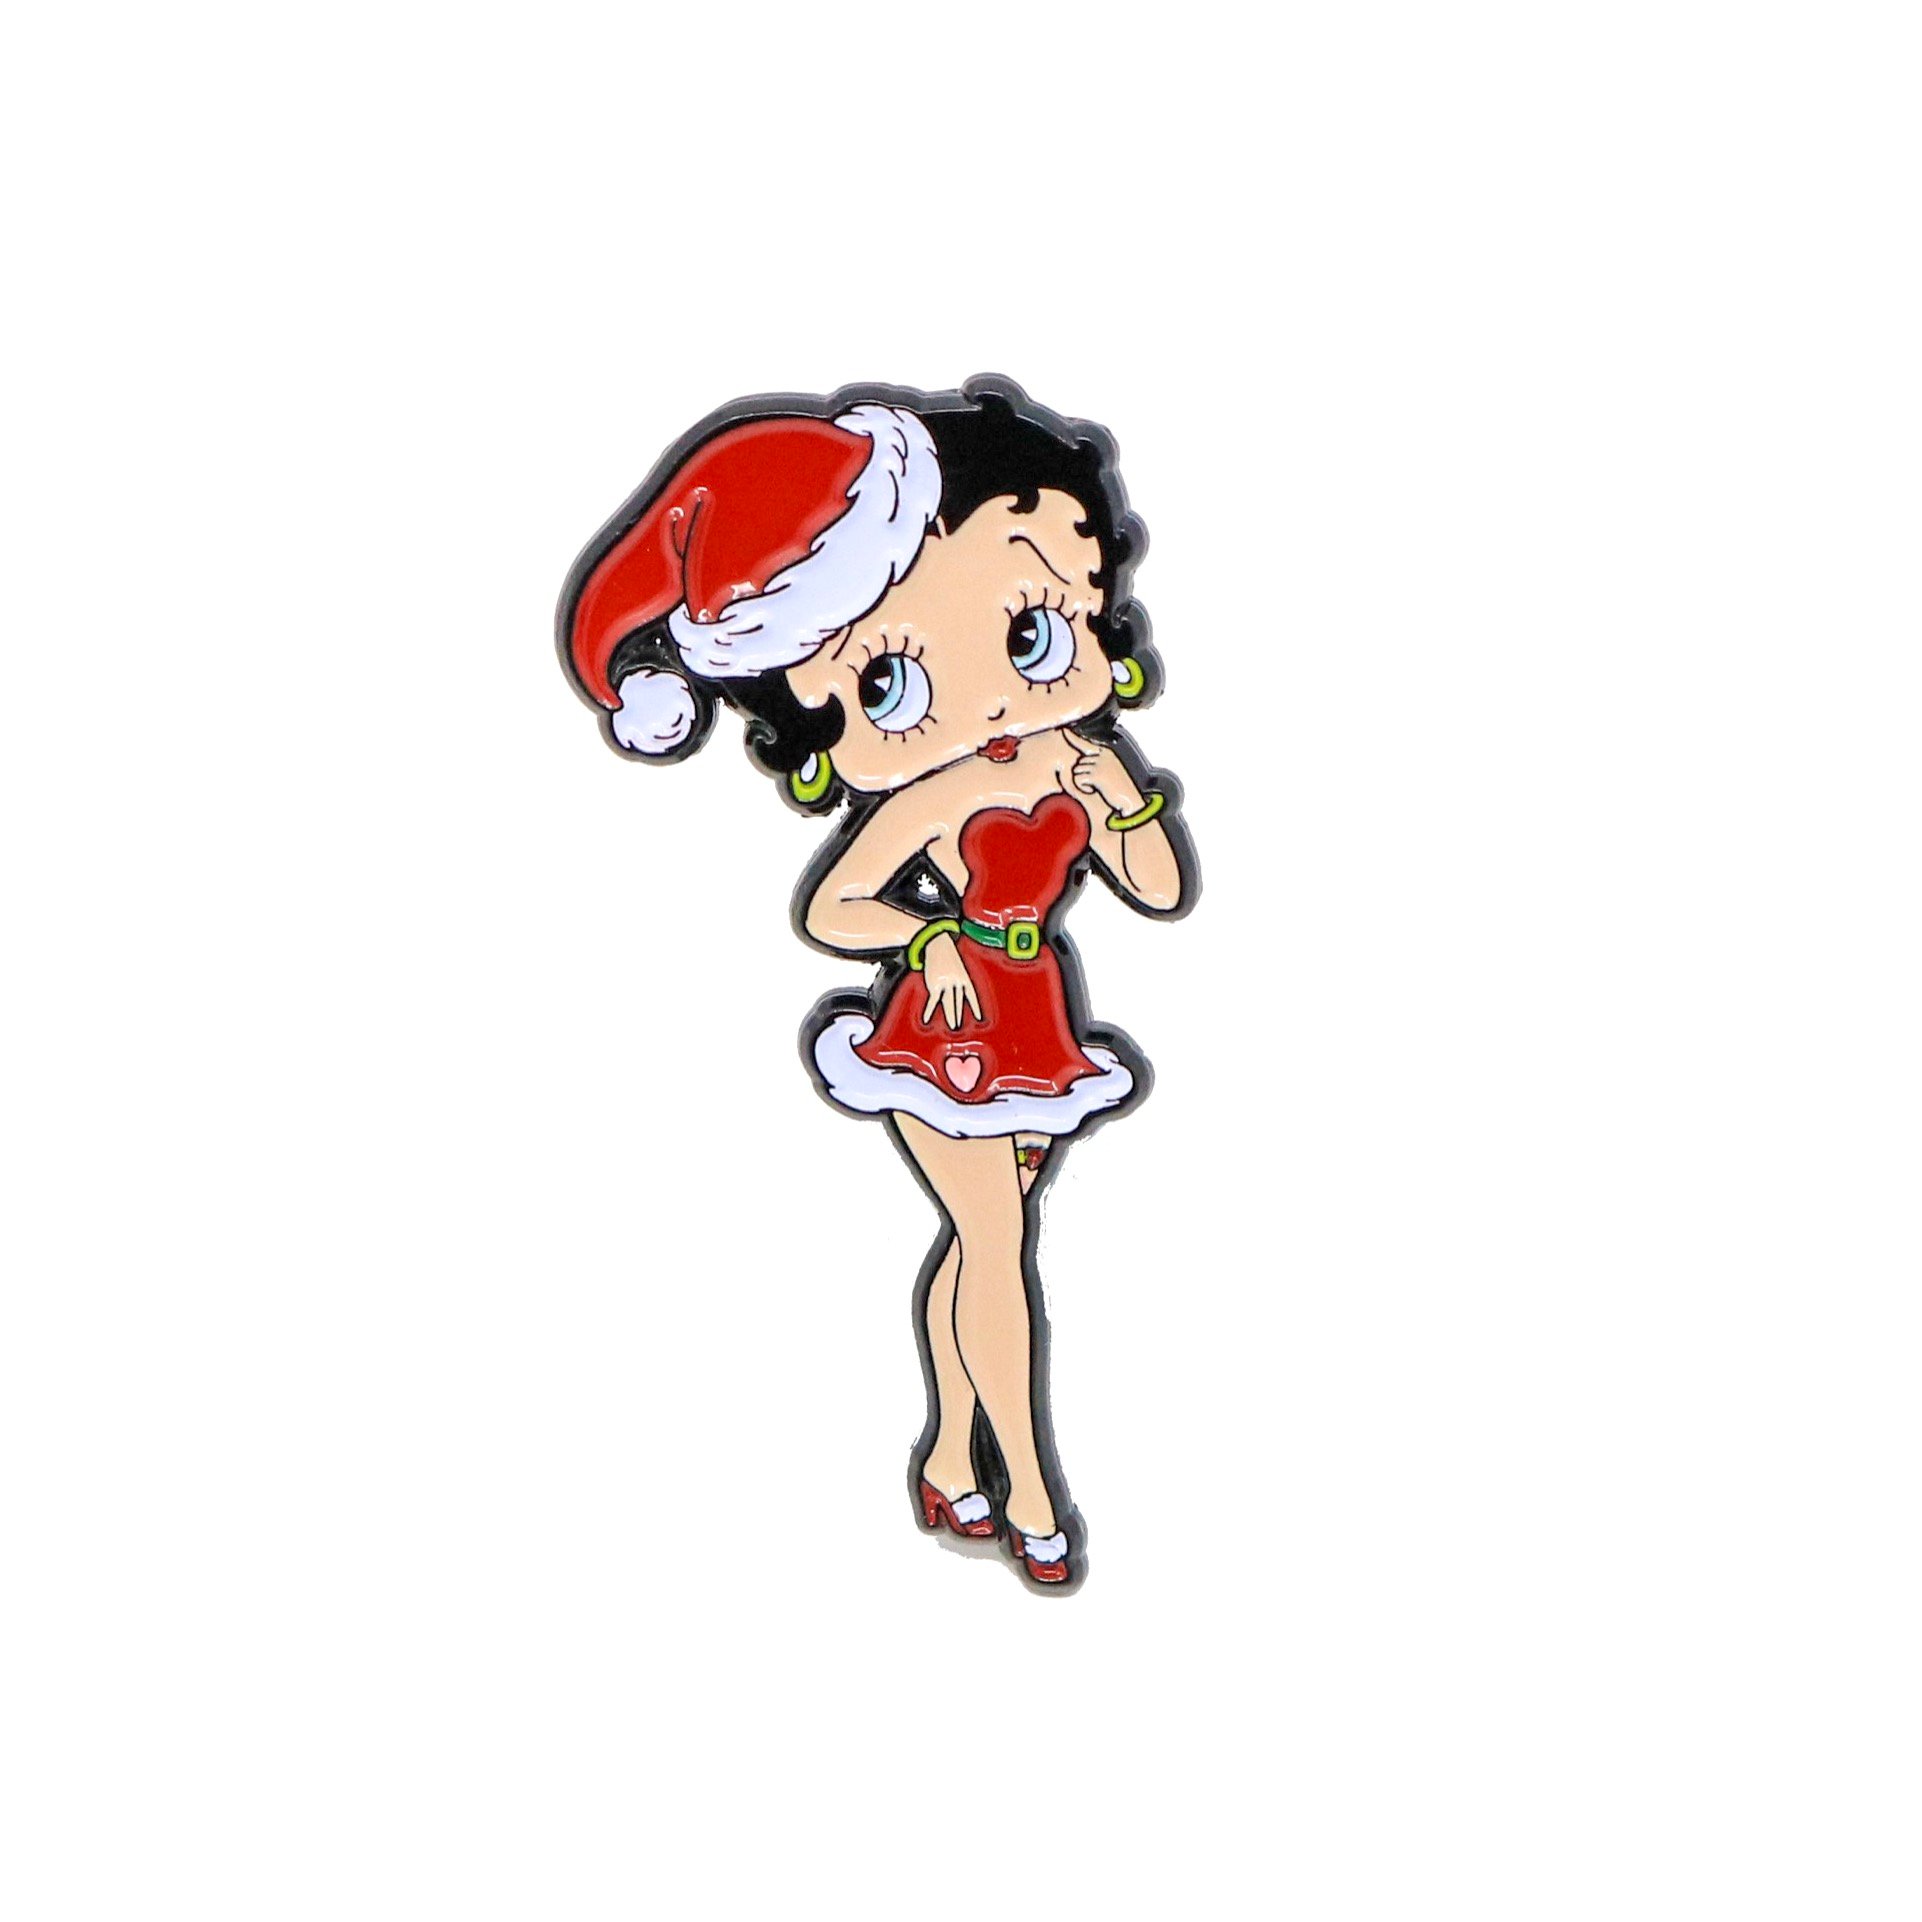 betty boop images